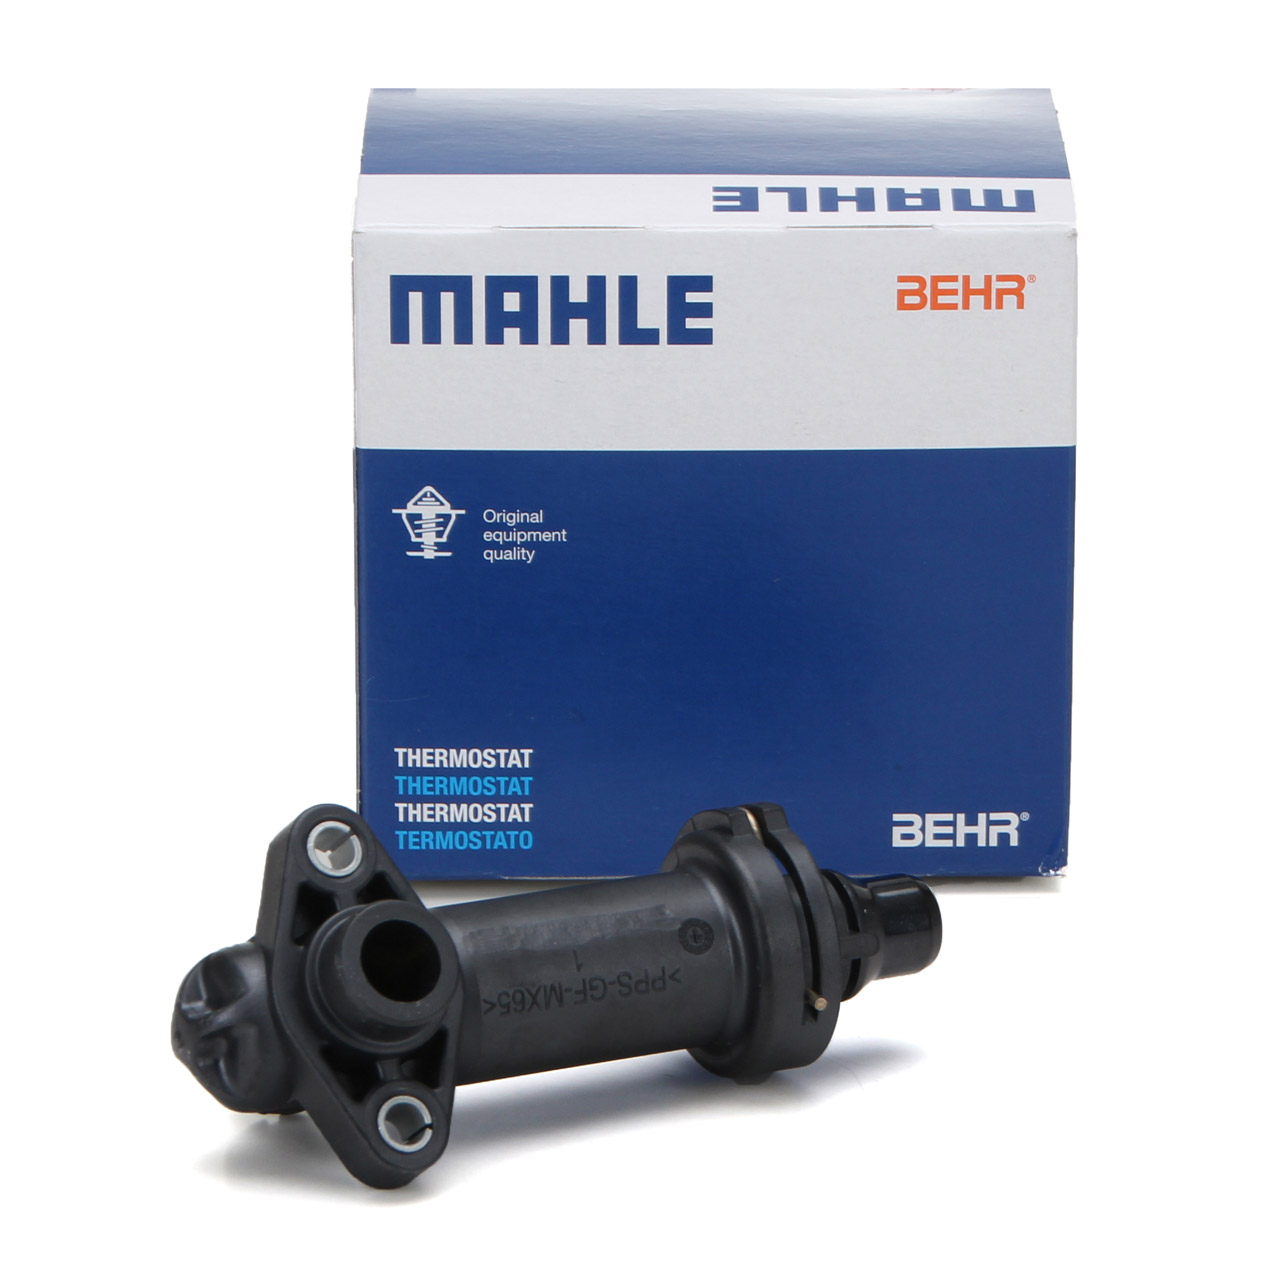 https://www.ws-autoteile.com/img/MAHLE_THERMOSTAT_TE270_A02013W280_202001220914_99.jpg